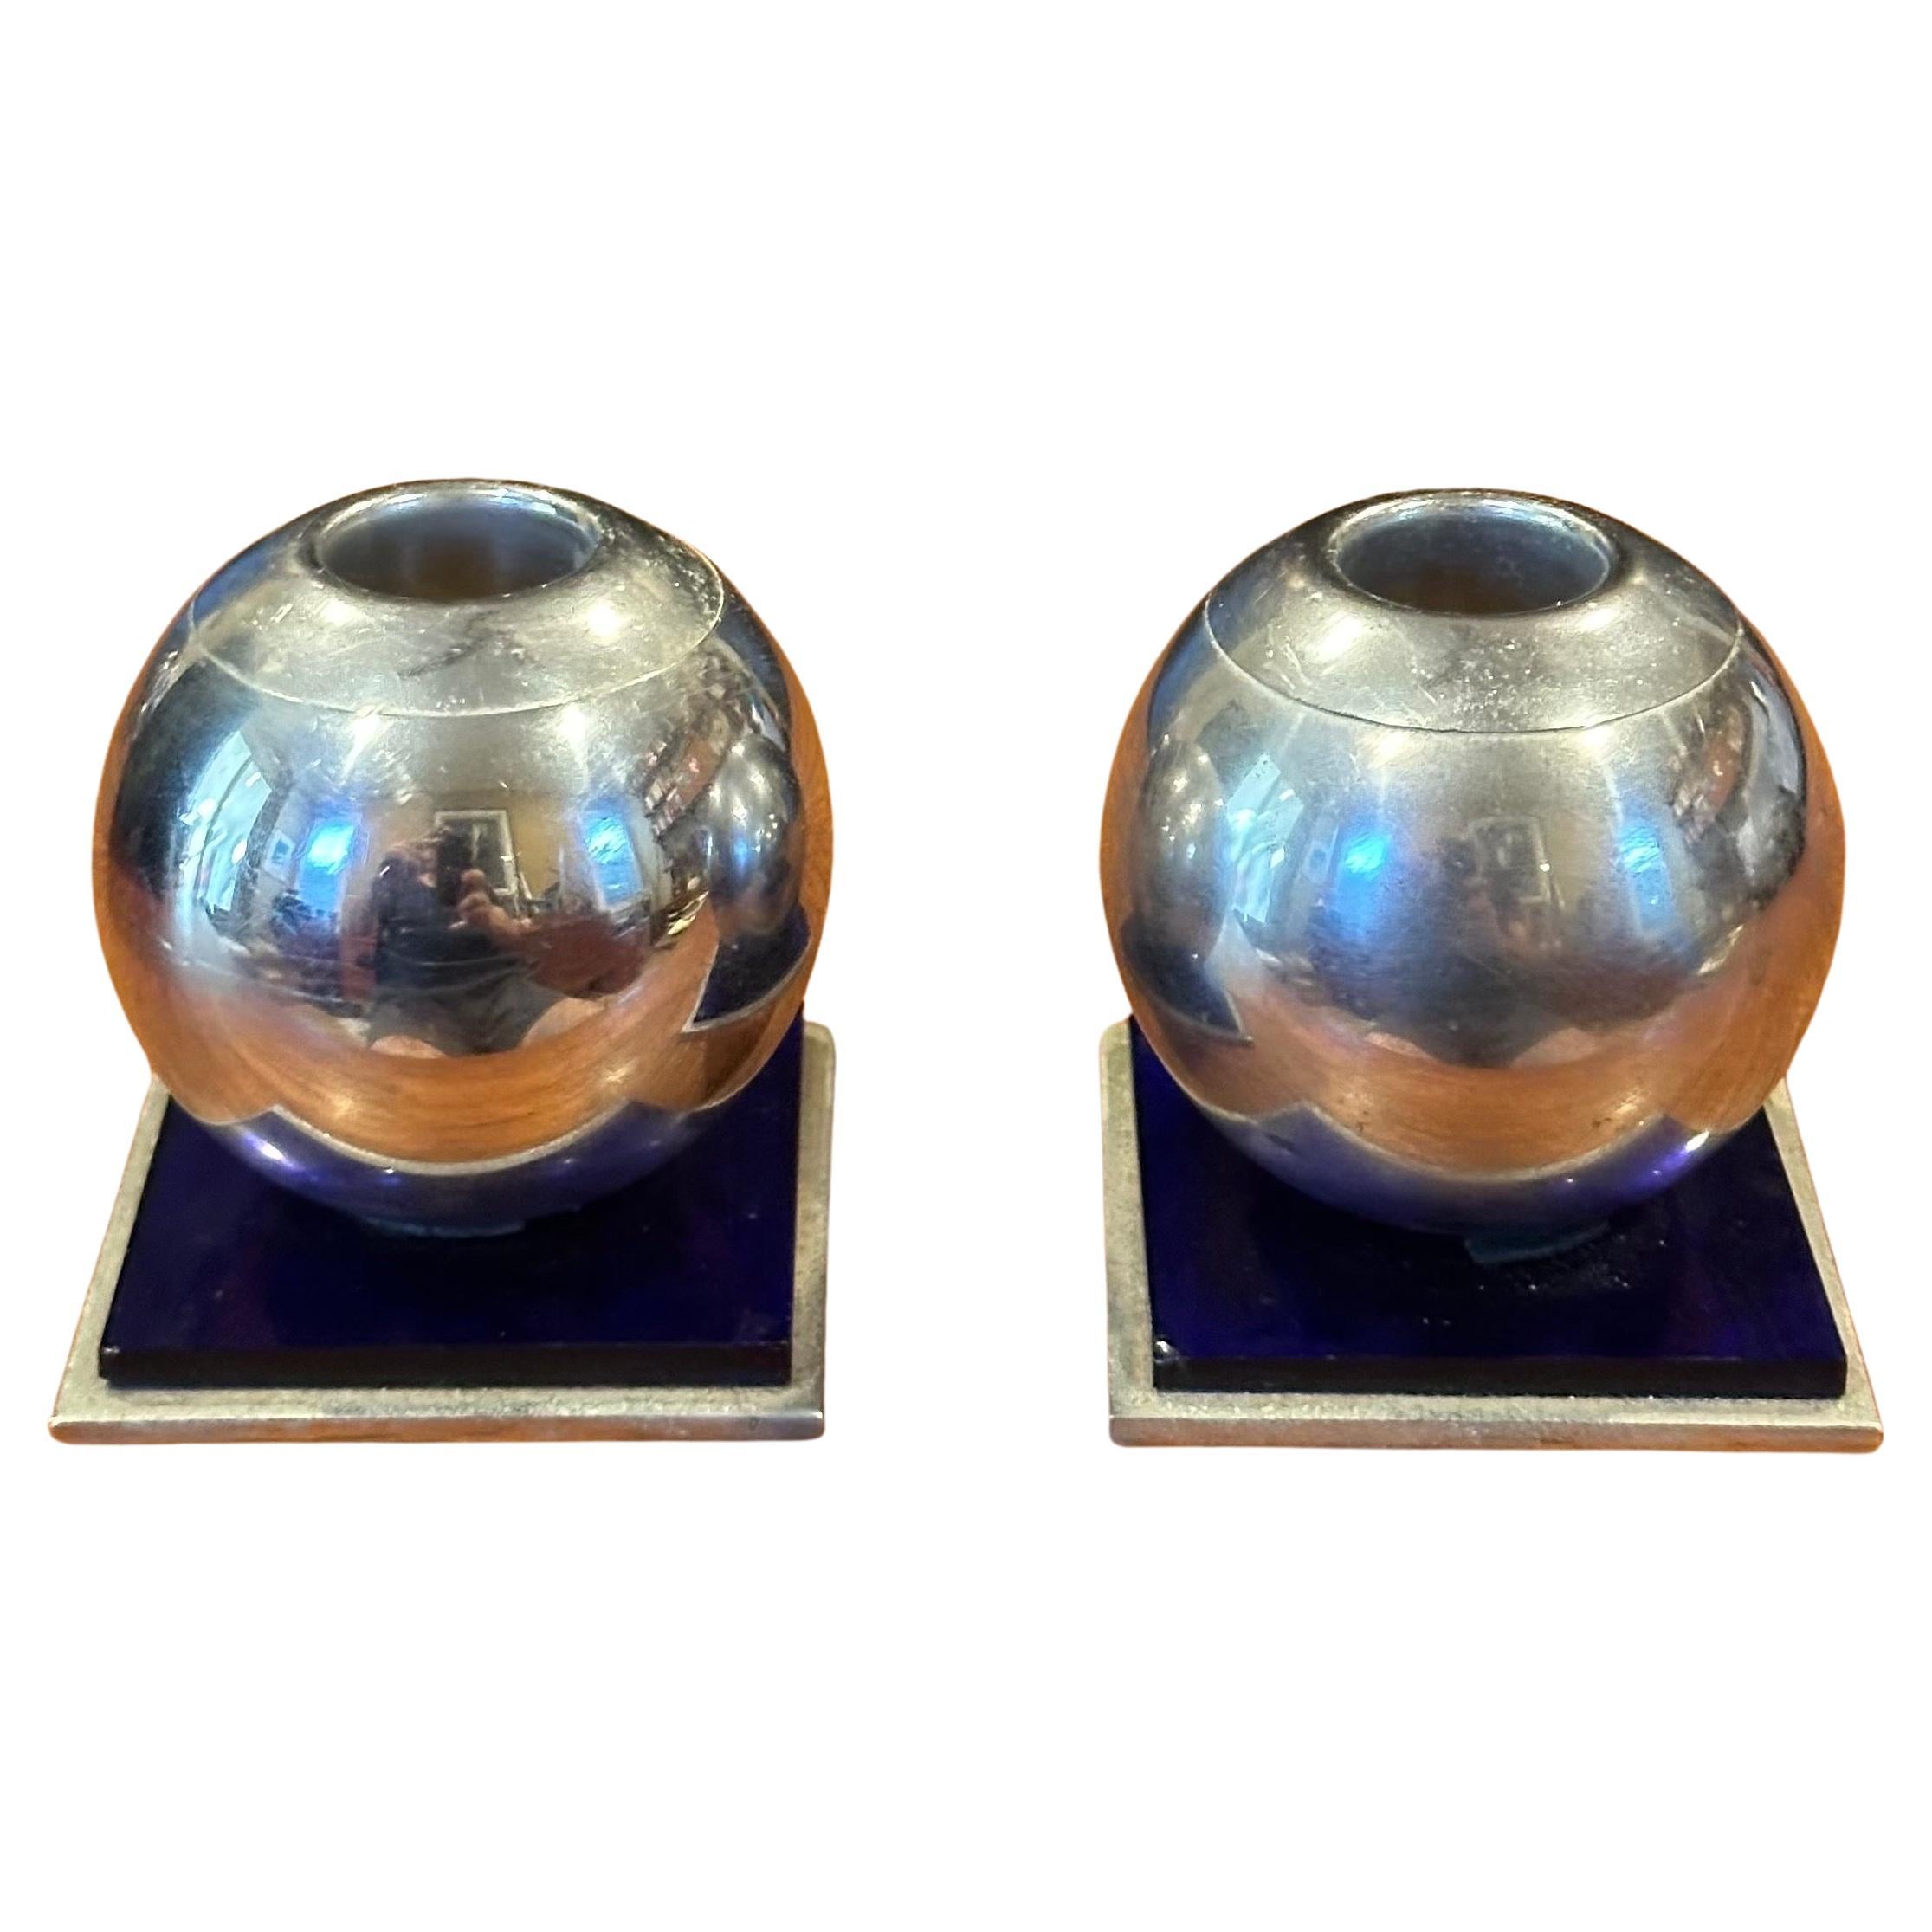 A very nice pair of modernist chrome and cobalt candle holders by Chase & Co., circa 1940s. The chrome design features a 2.5